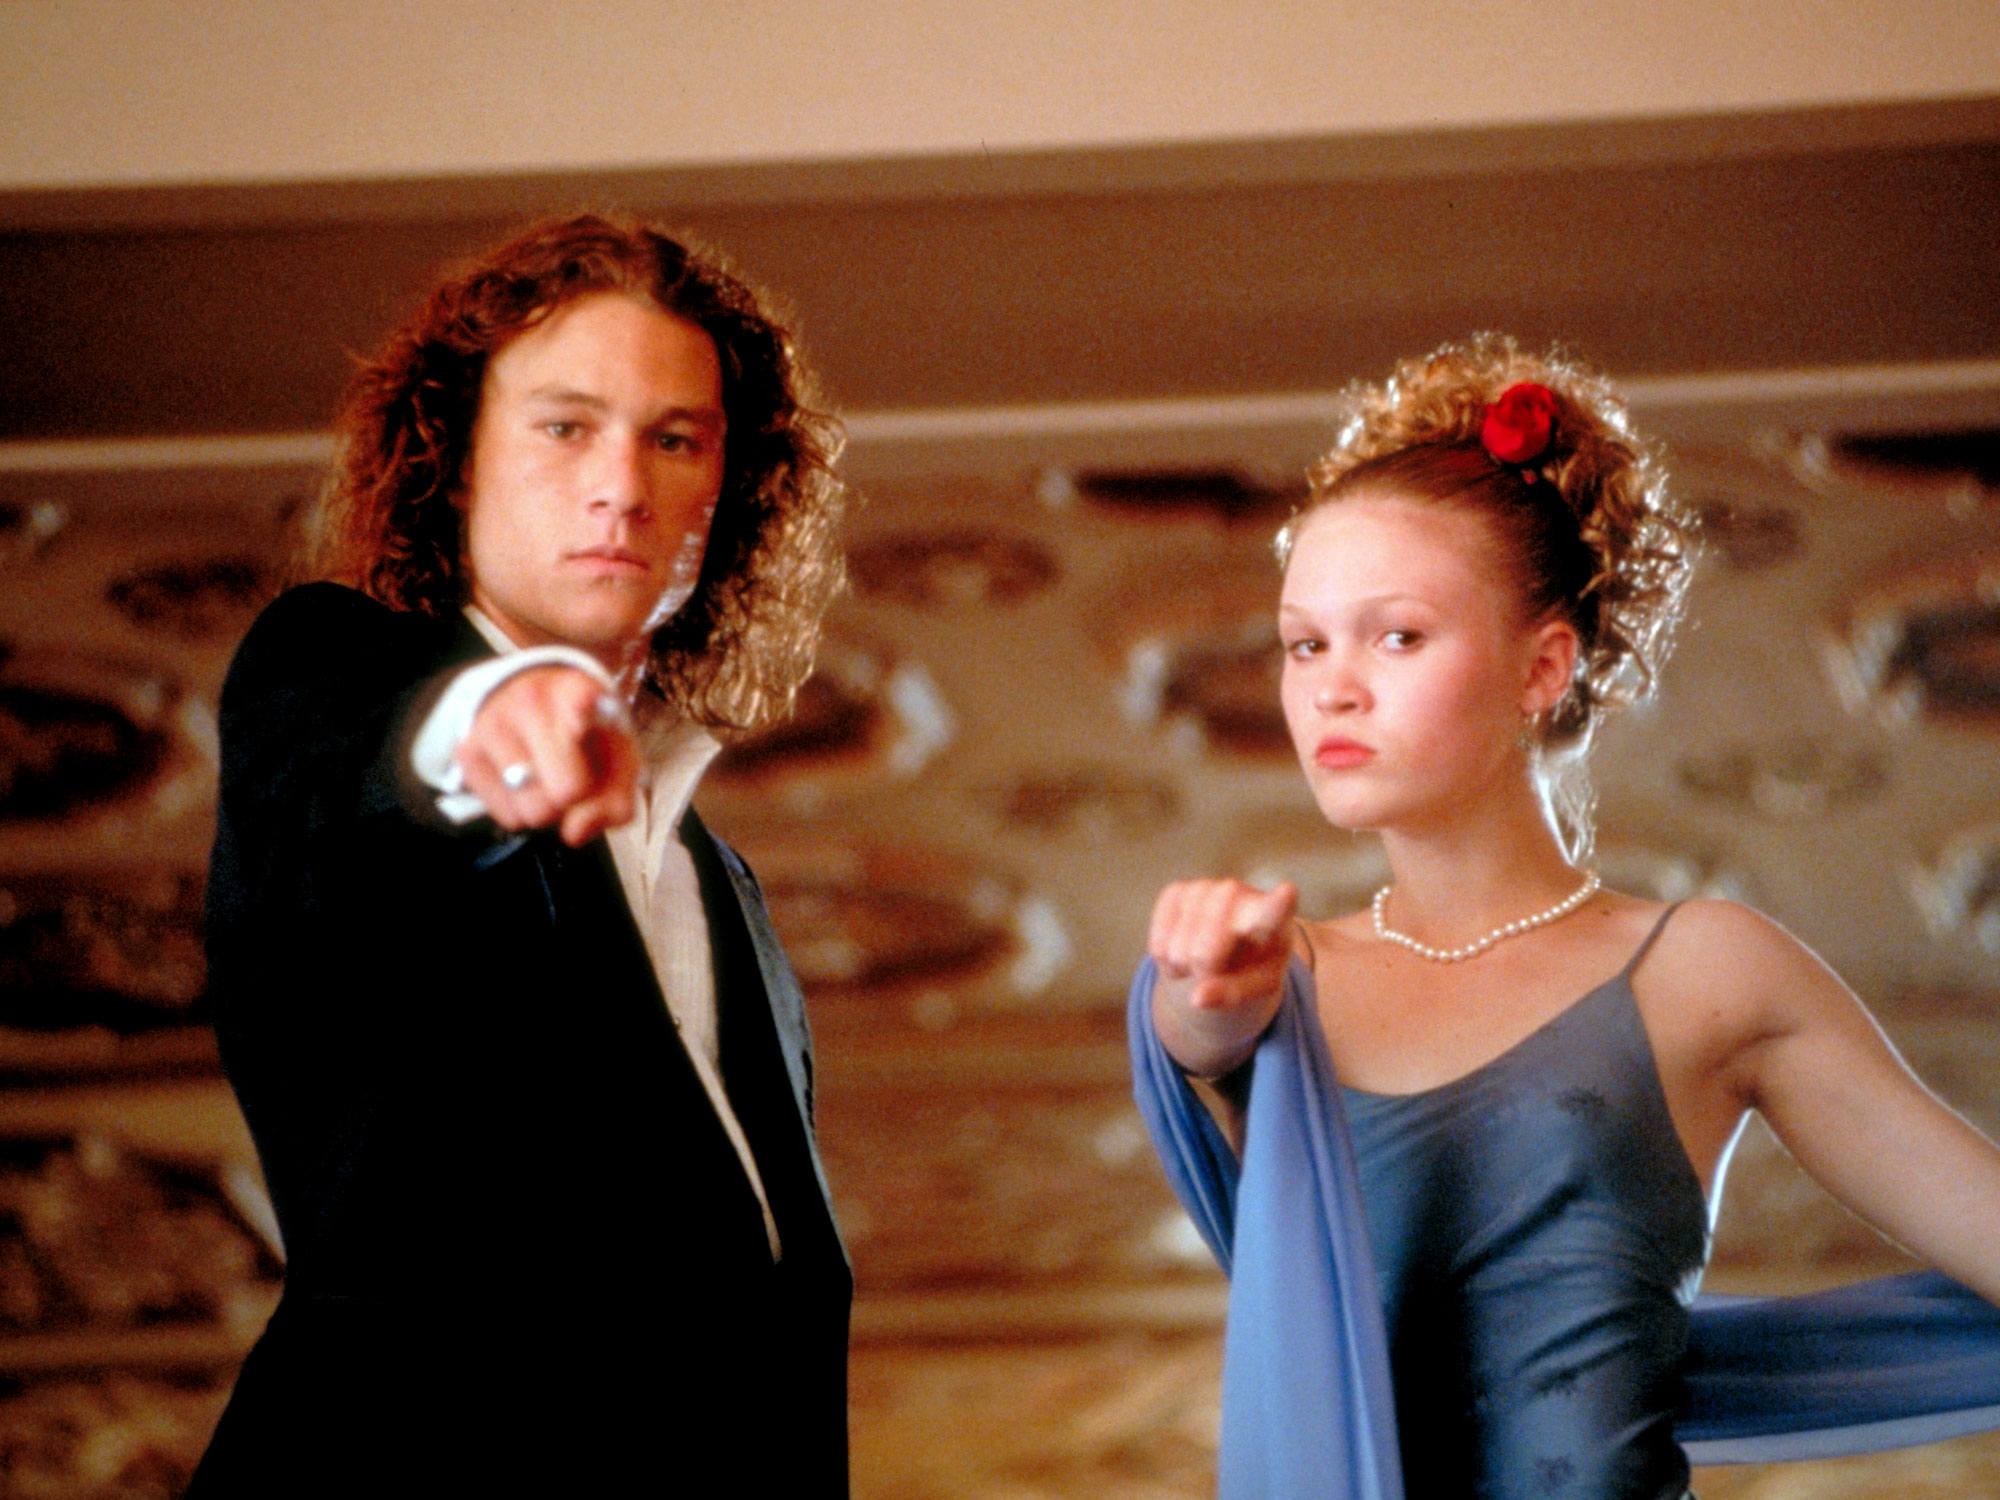 10 Things I Hate About You (1999)